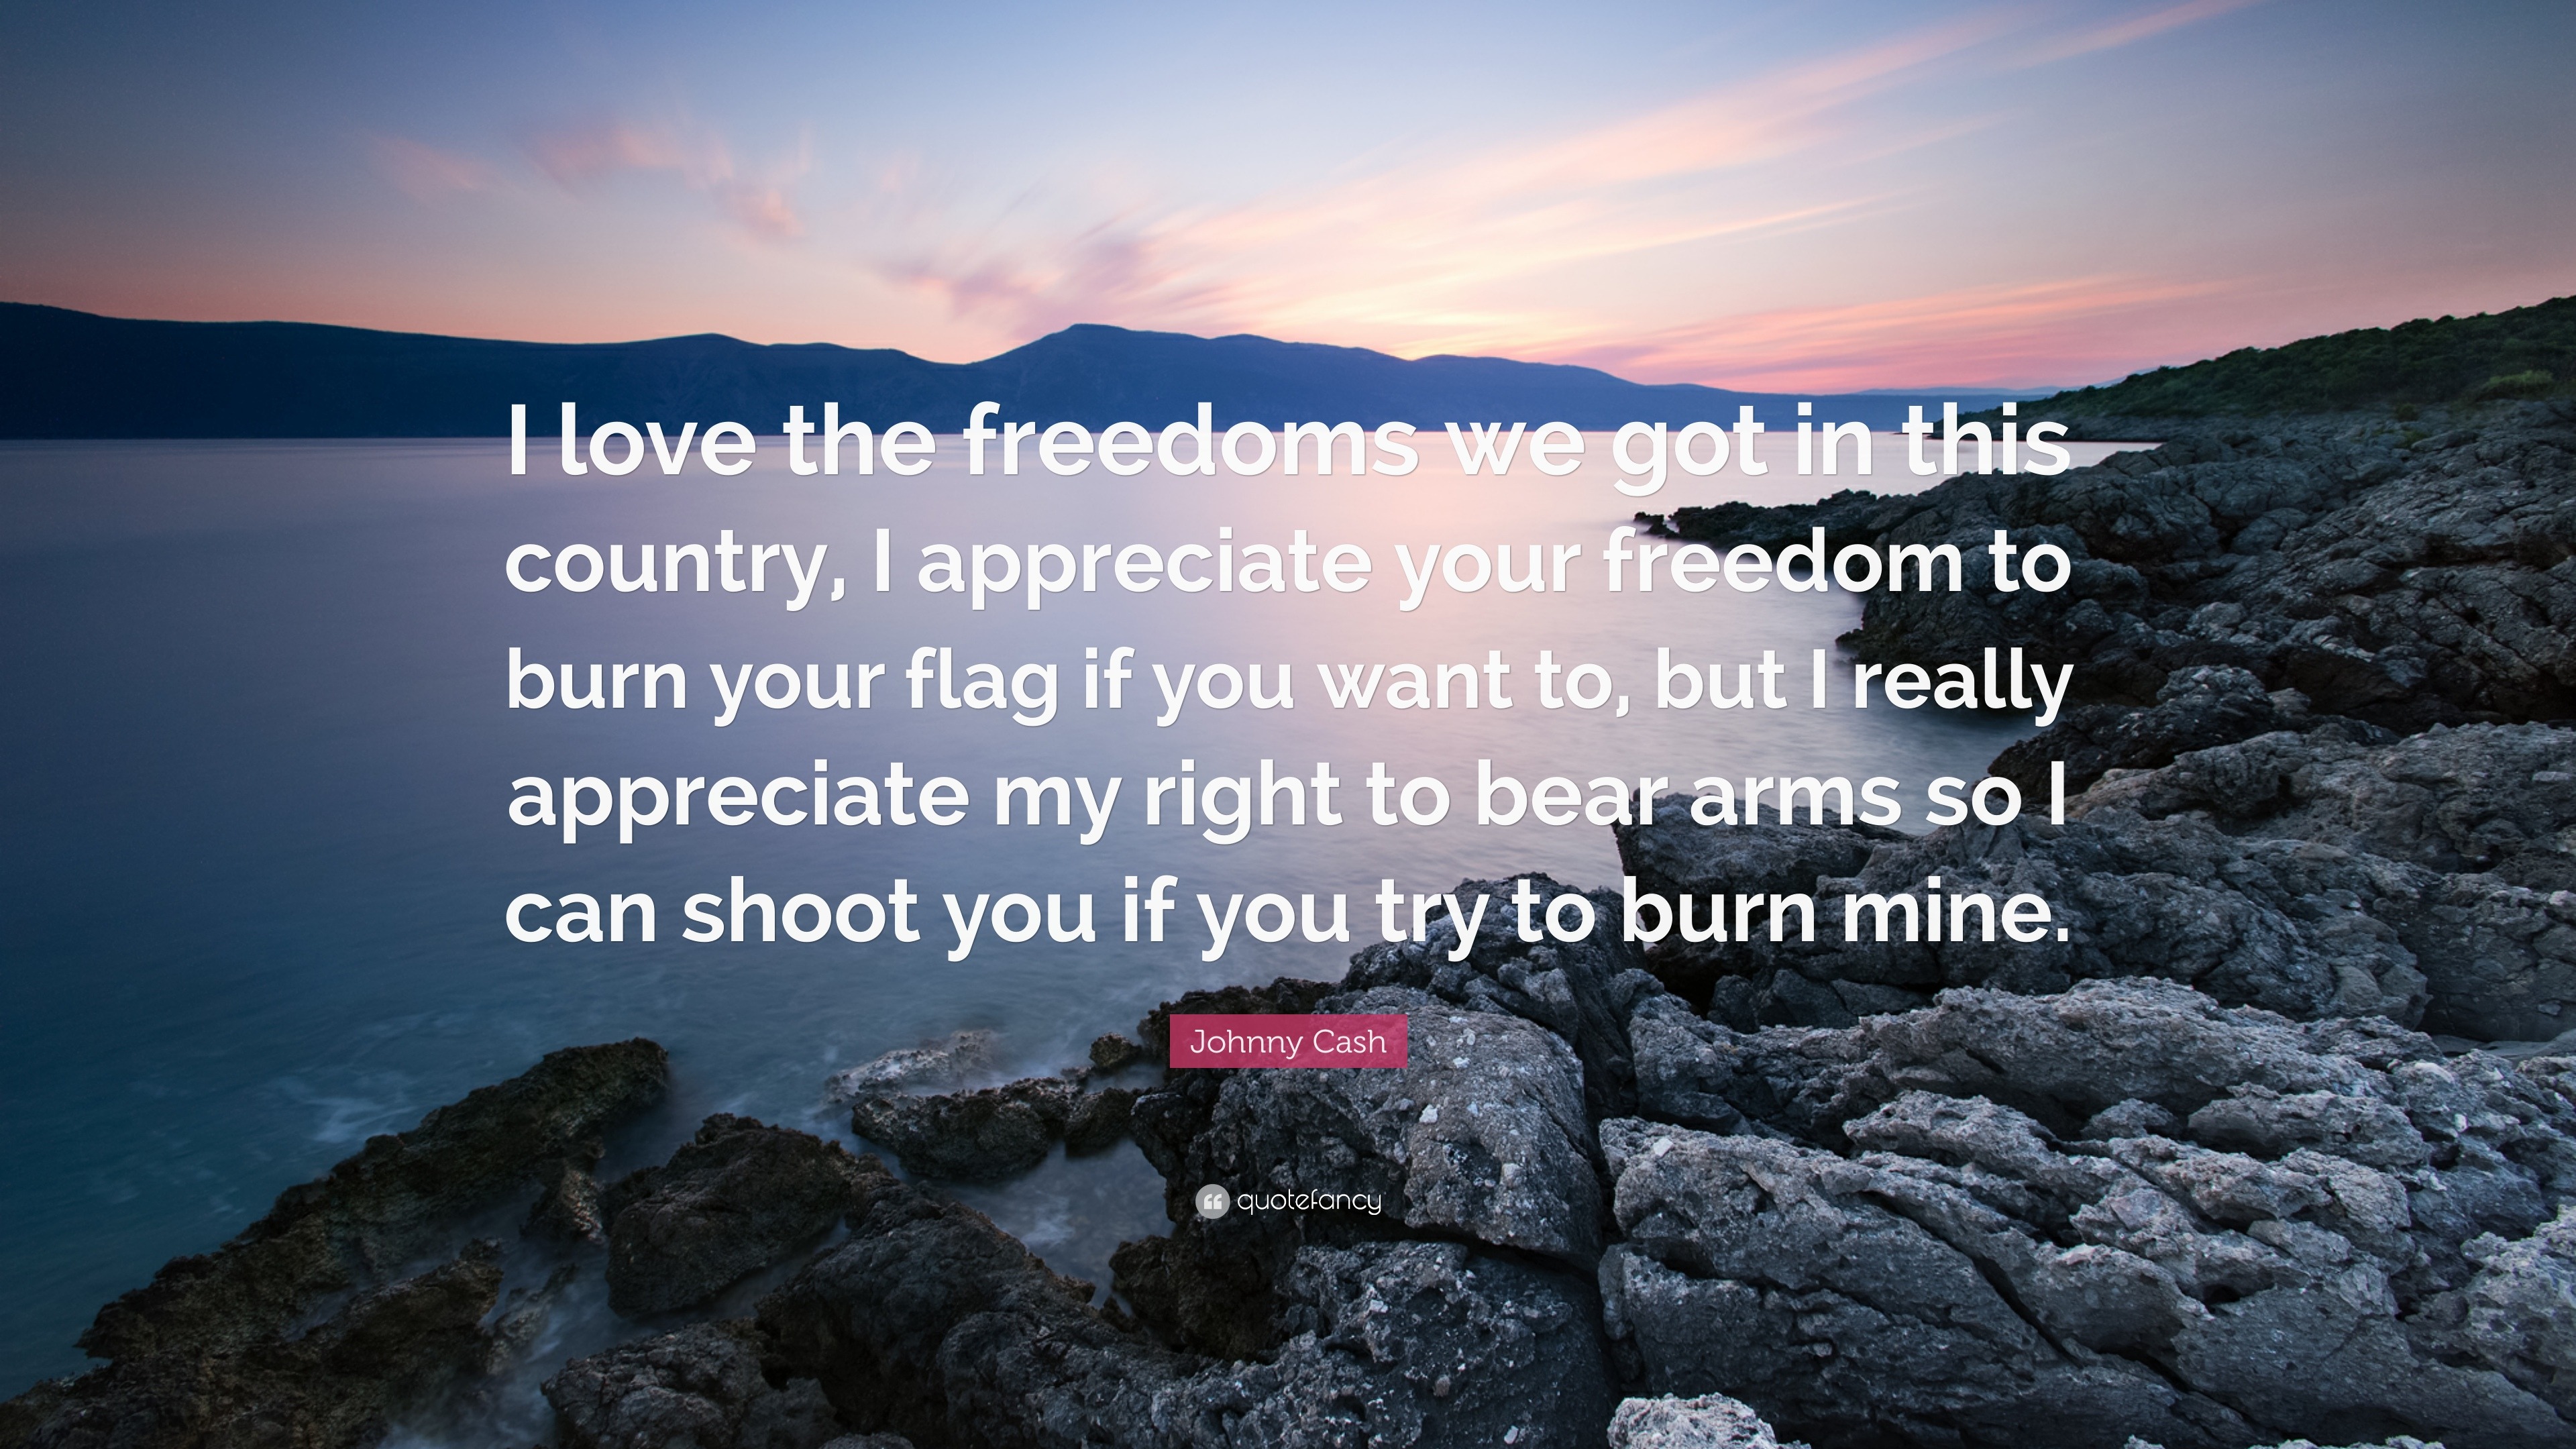 Johnny Cash Quote “I love the freedoms we got in this country I